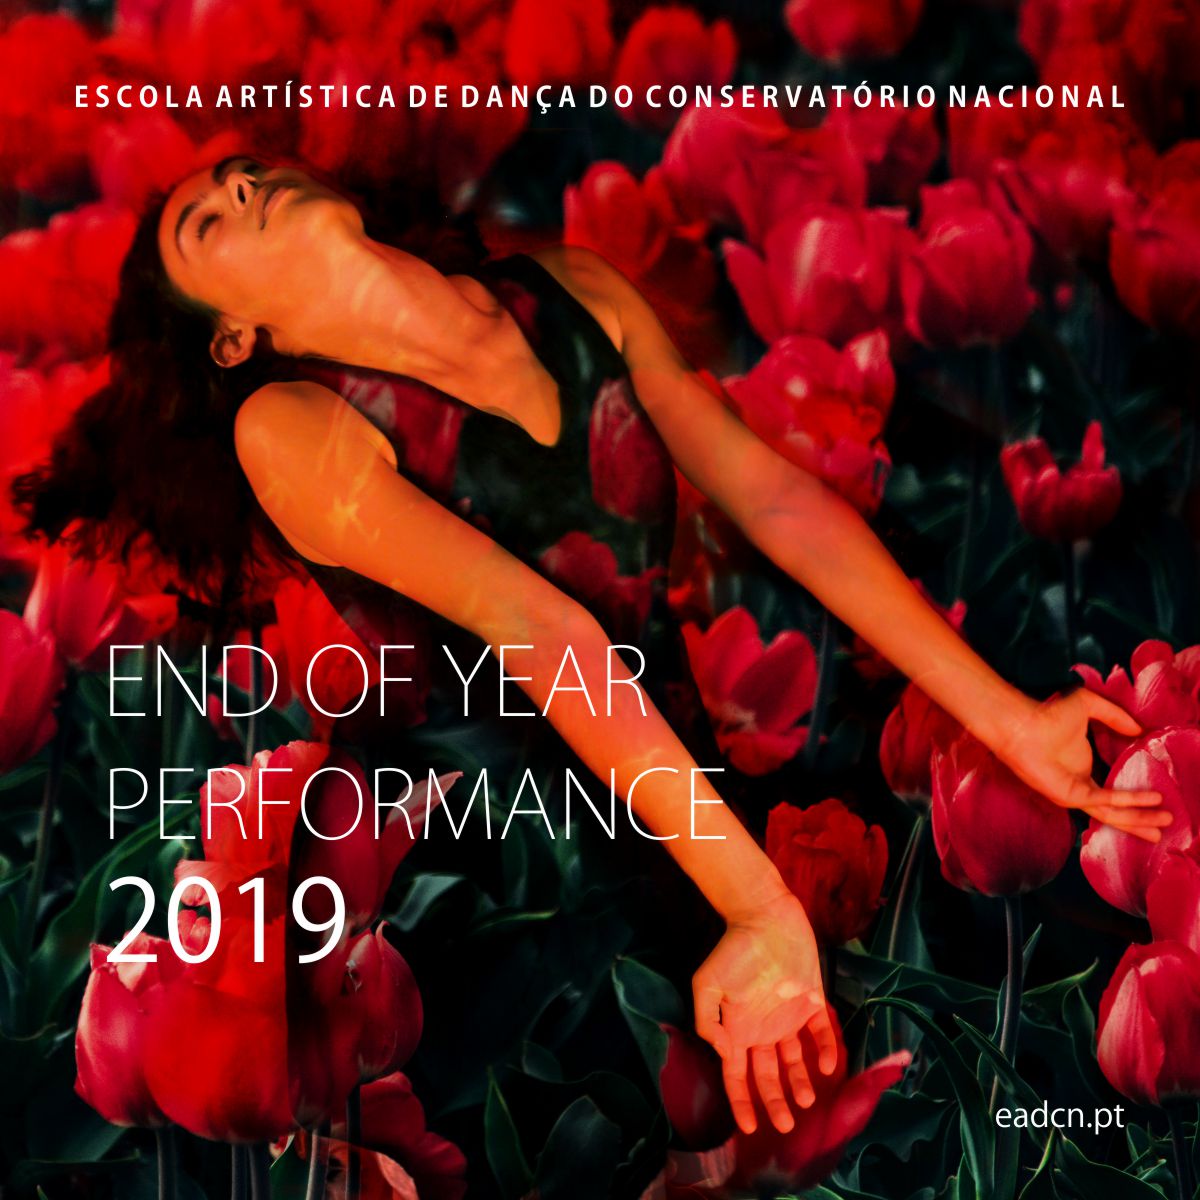 END OF YEAR PERFORMANCE 2019